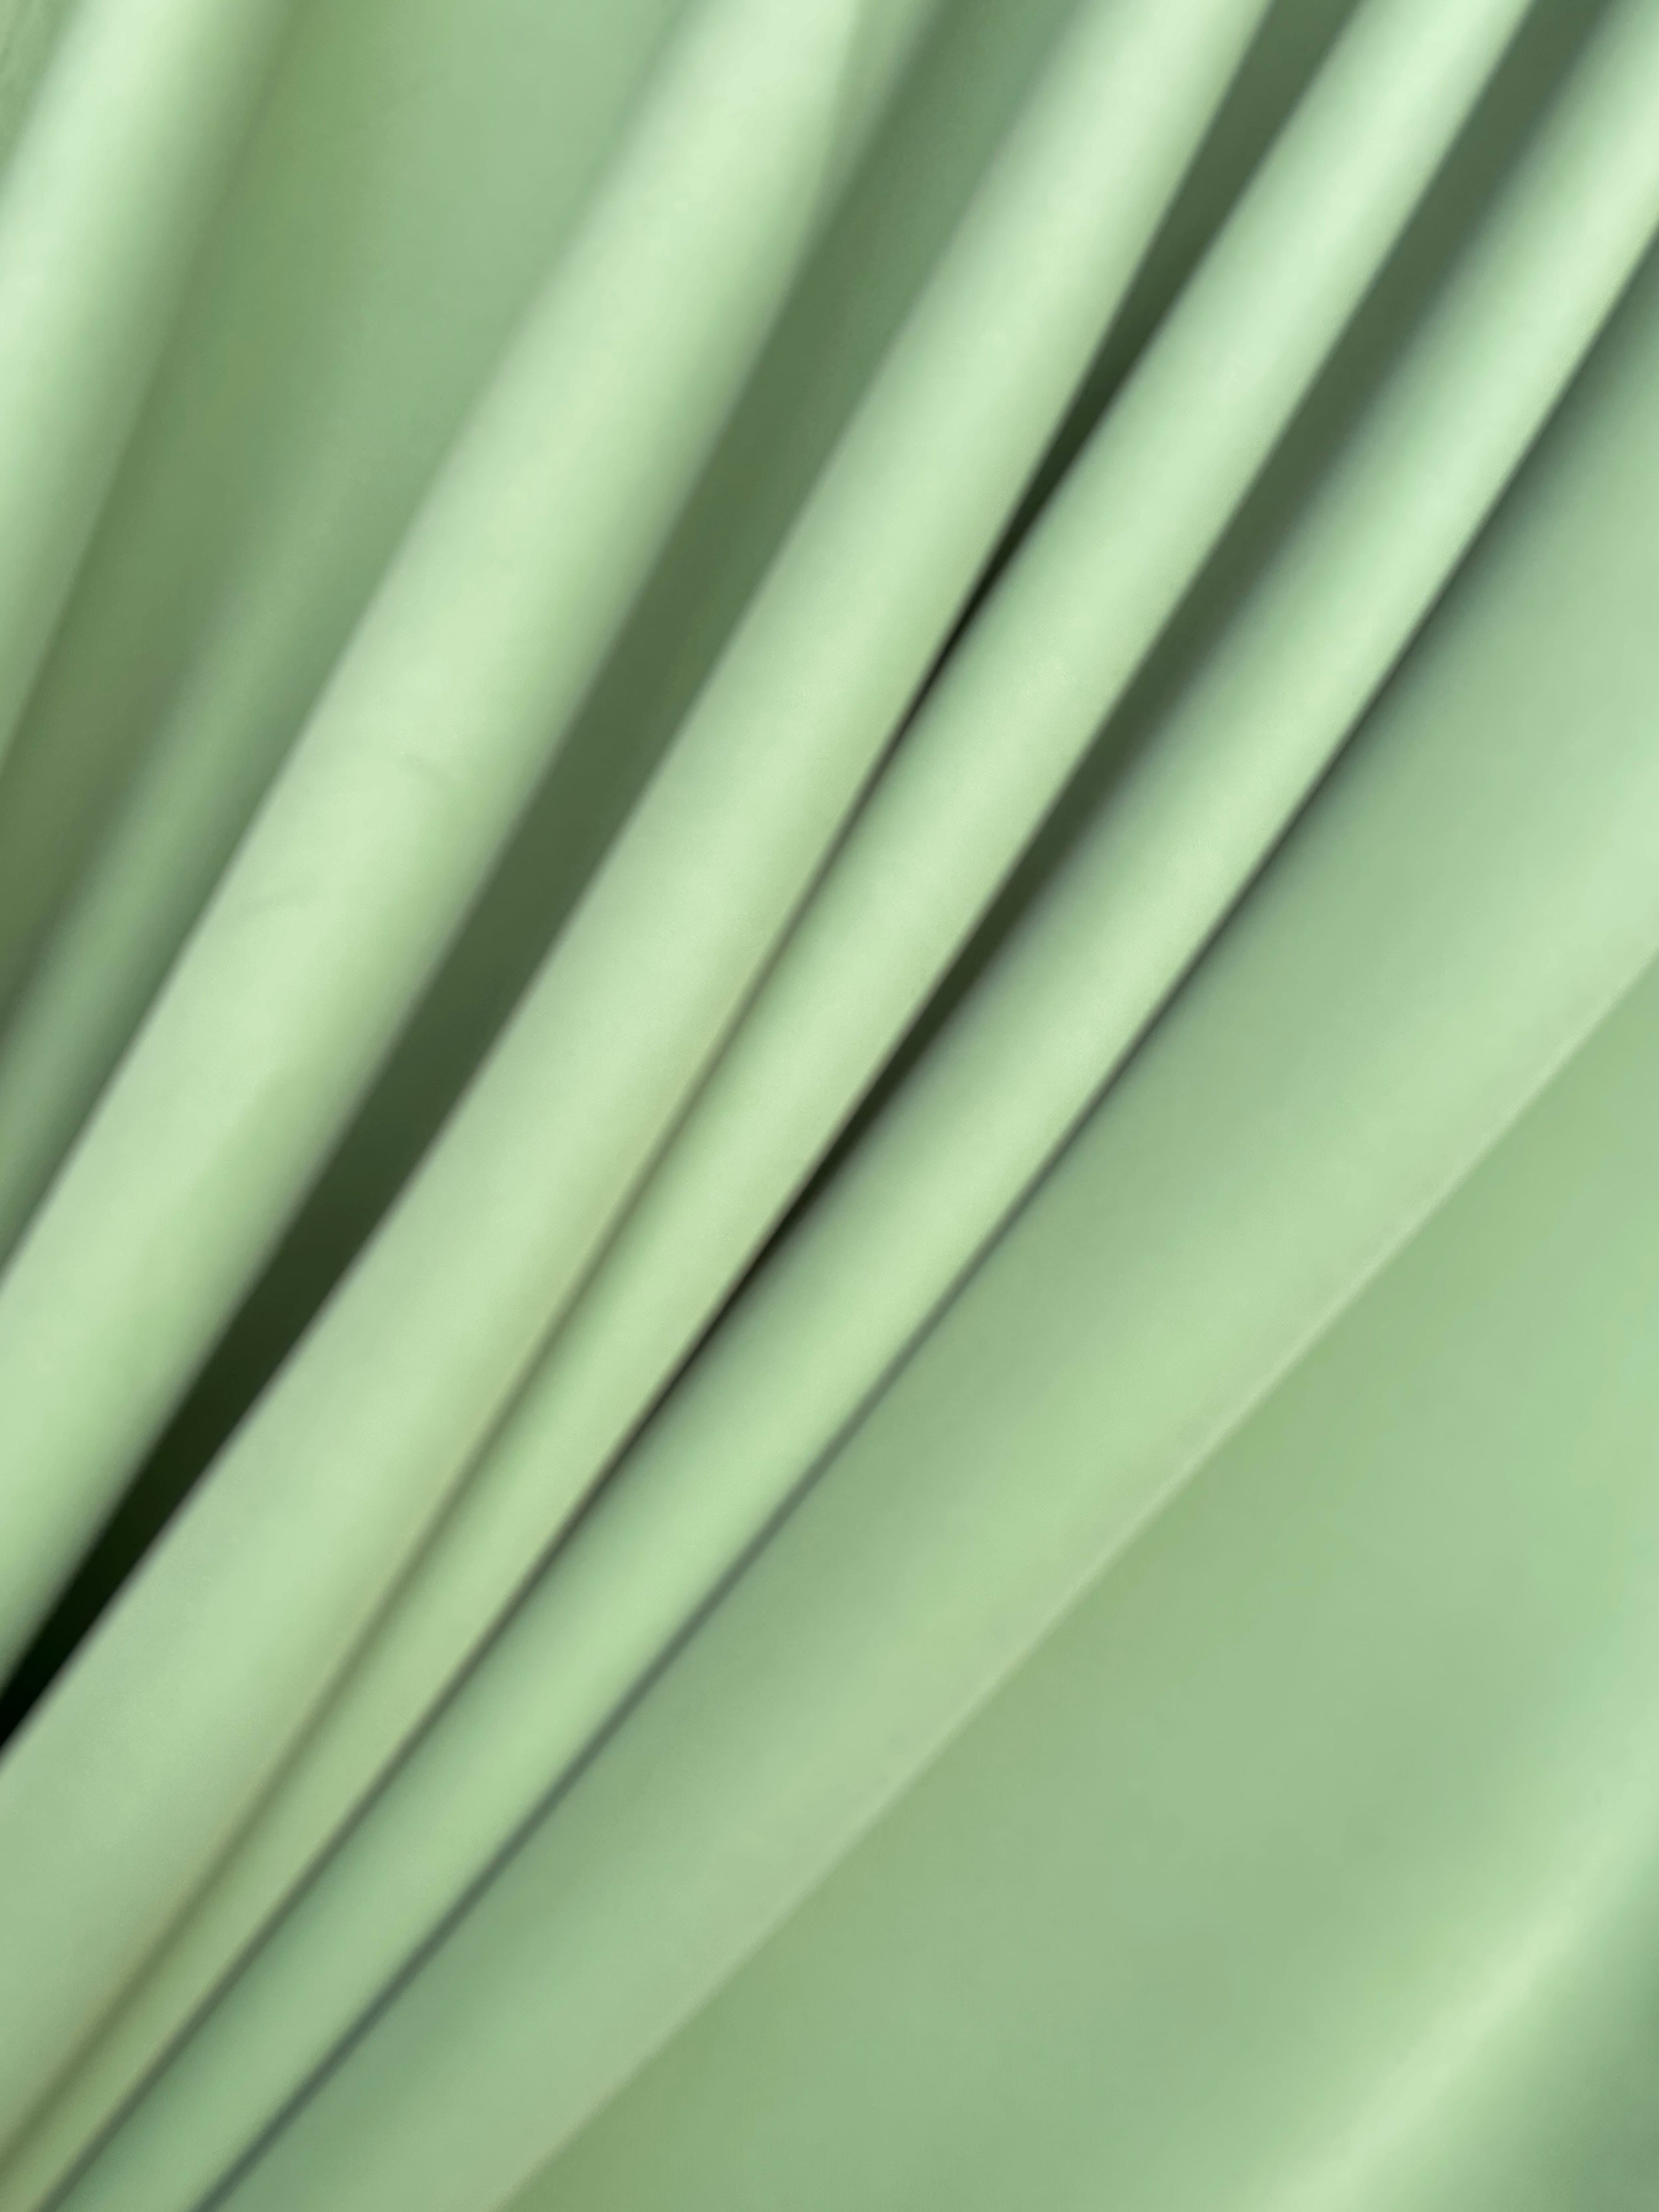 pistachio stretch crepe, pistachio color fabric, green fabric, green dress for woman, pistachio bridal dress, bridal luxury dress, fabric for woman, 4 way stretch, buy fabric online, discounted fabric, fabric on sale, crepe fabric, bridal crepe, crepe for dress, wedding crepe, chiffon crepe, crepe clothing material